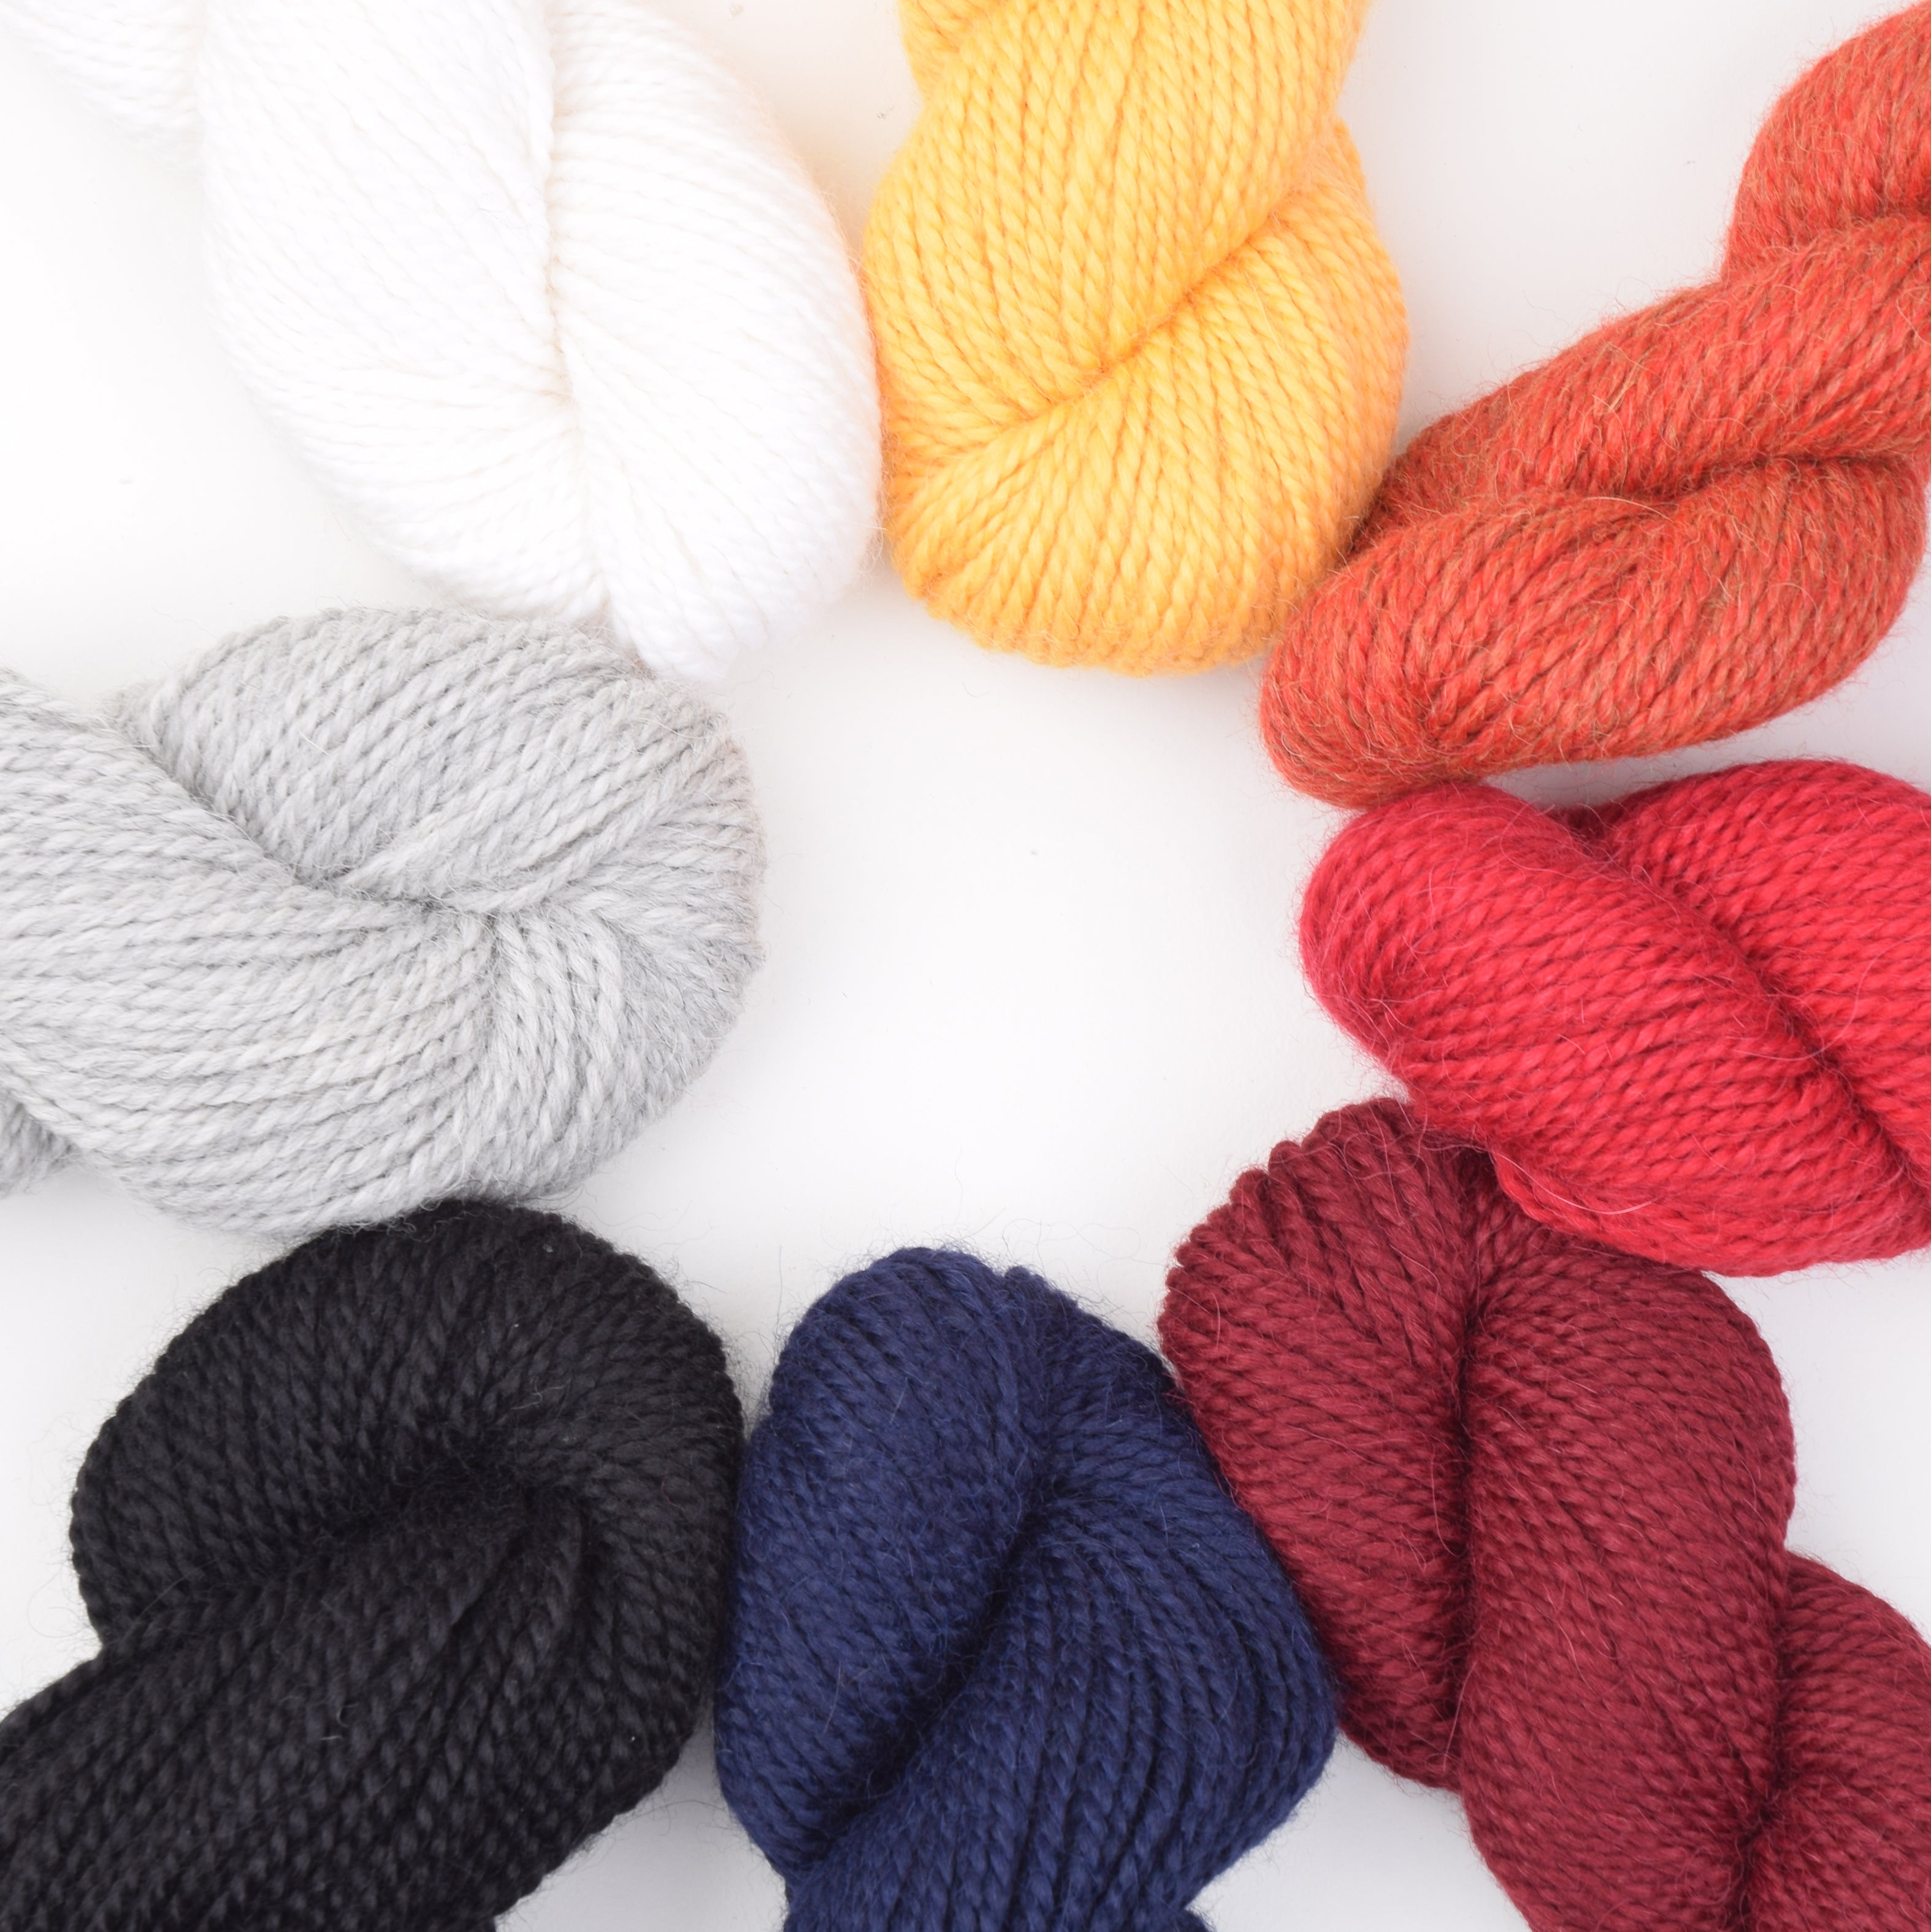 Yarn for Knitting and Crochet